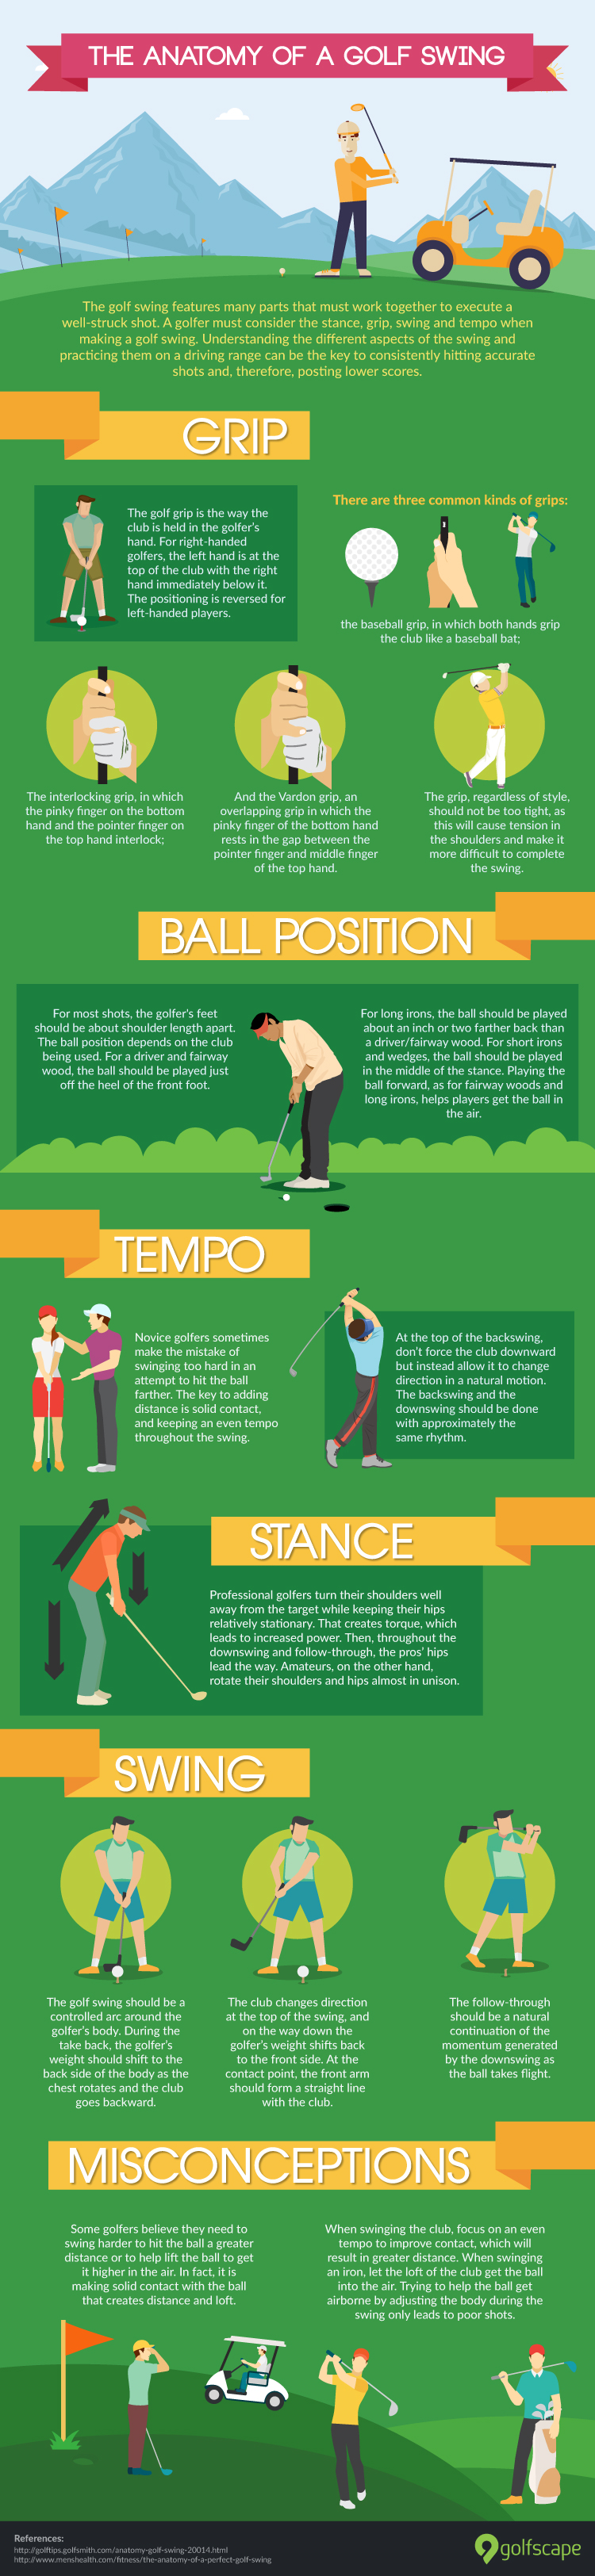 The anotomy of a golf swing infographic